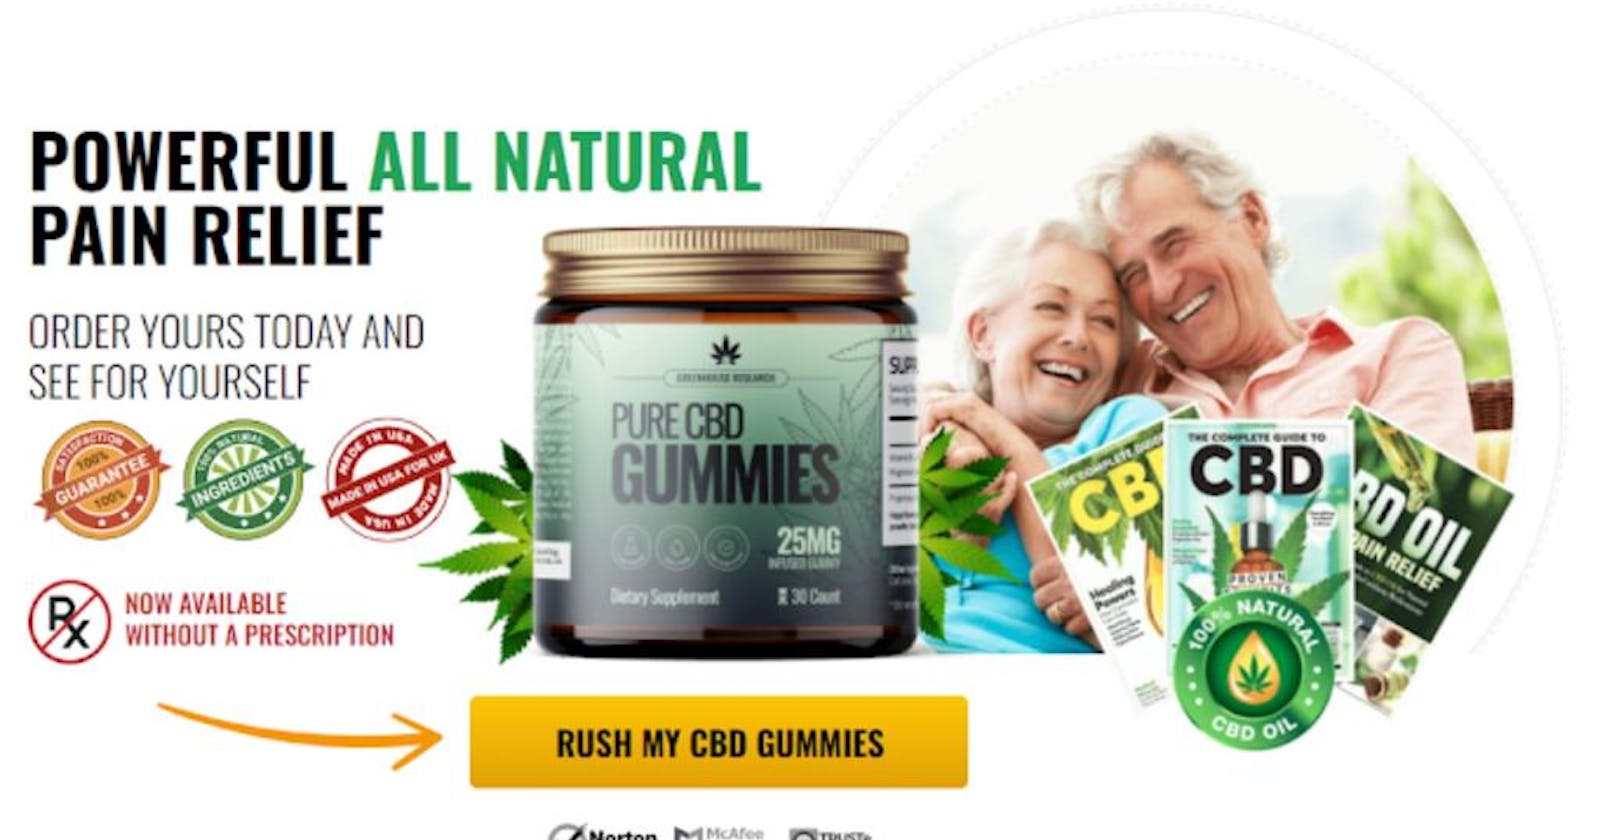 Herbluxe CBD Gummies Does It Work Or Just Scam?